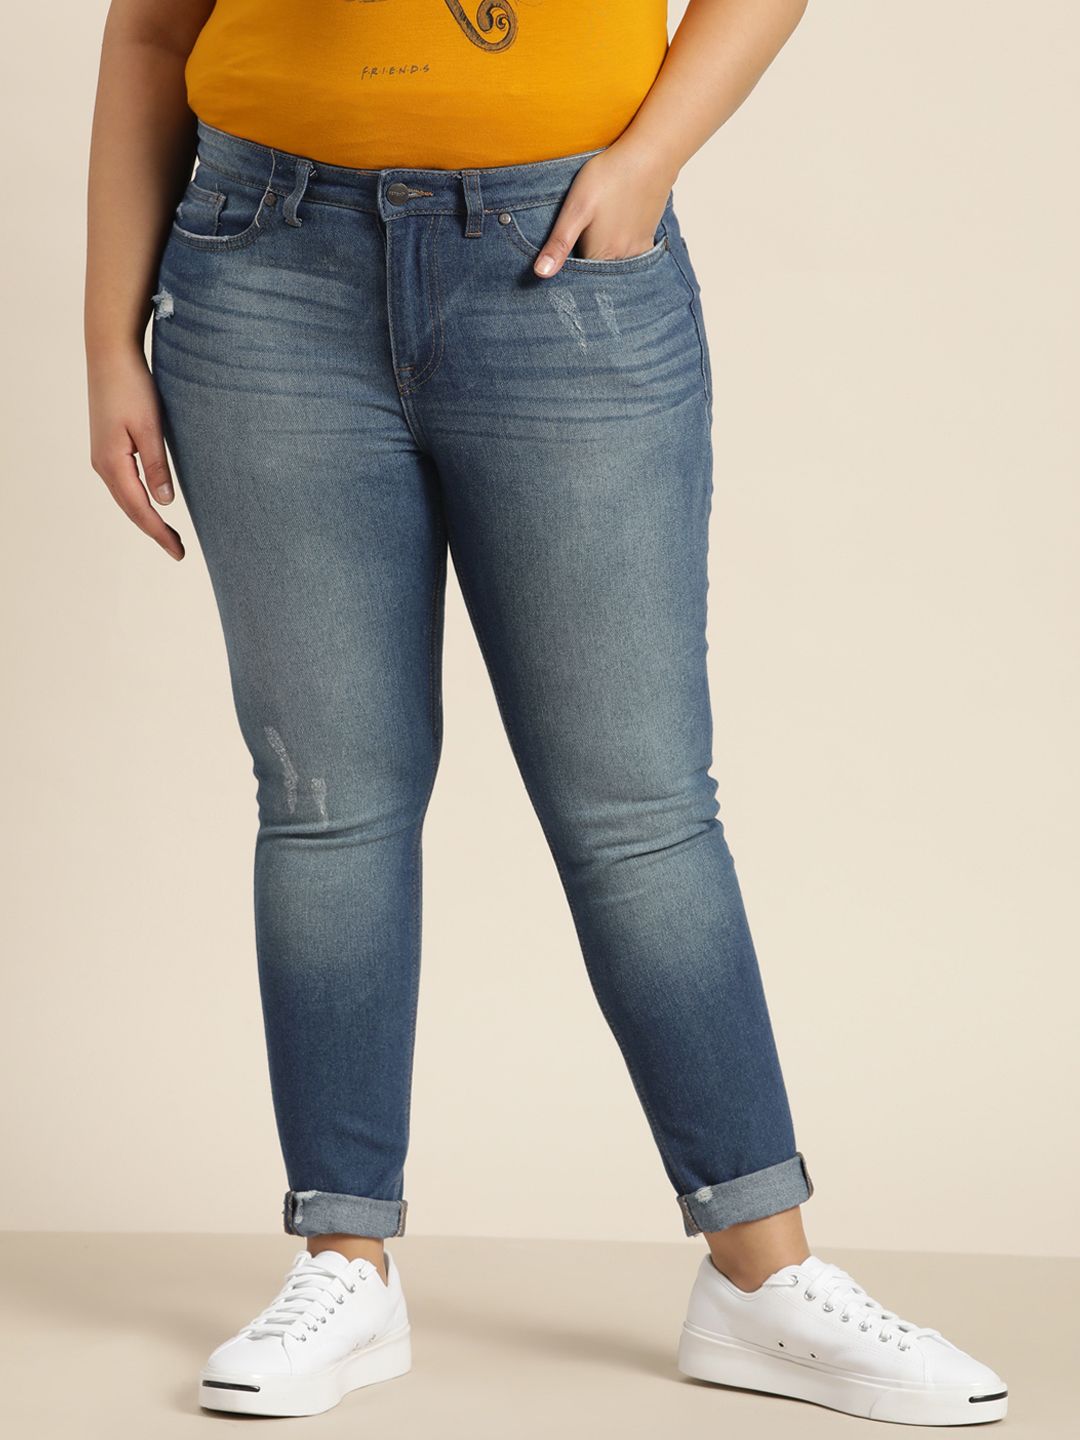 Sztori Plus Size Women Blue Skinny Fit Low Distress Light Fade Stretchable Jeans Price in India